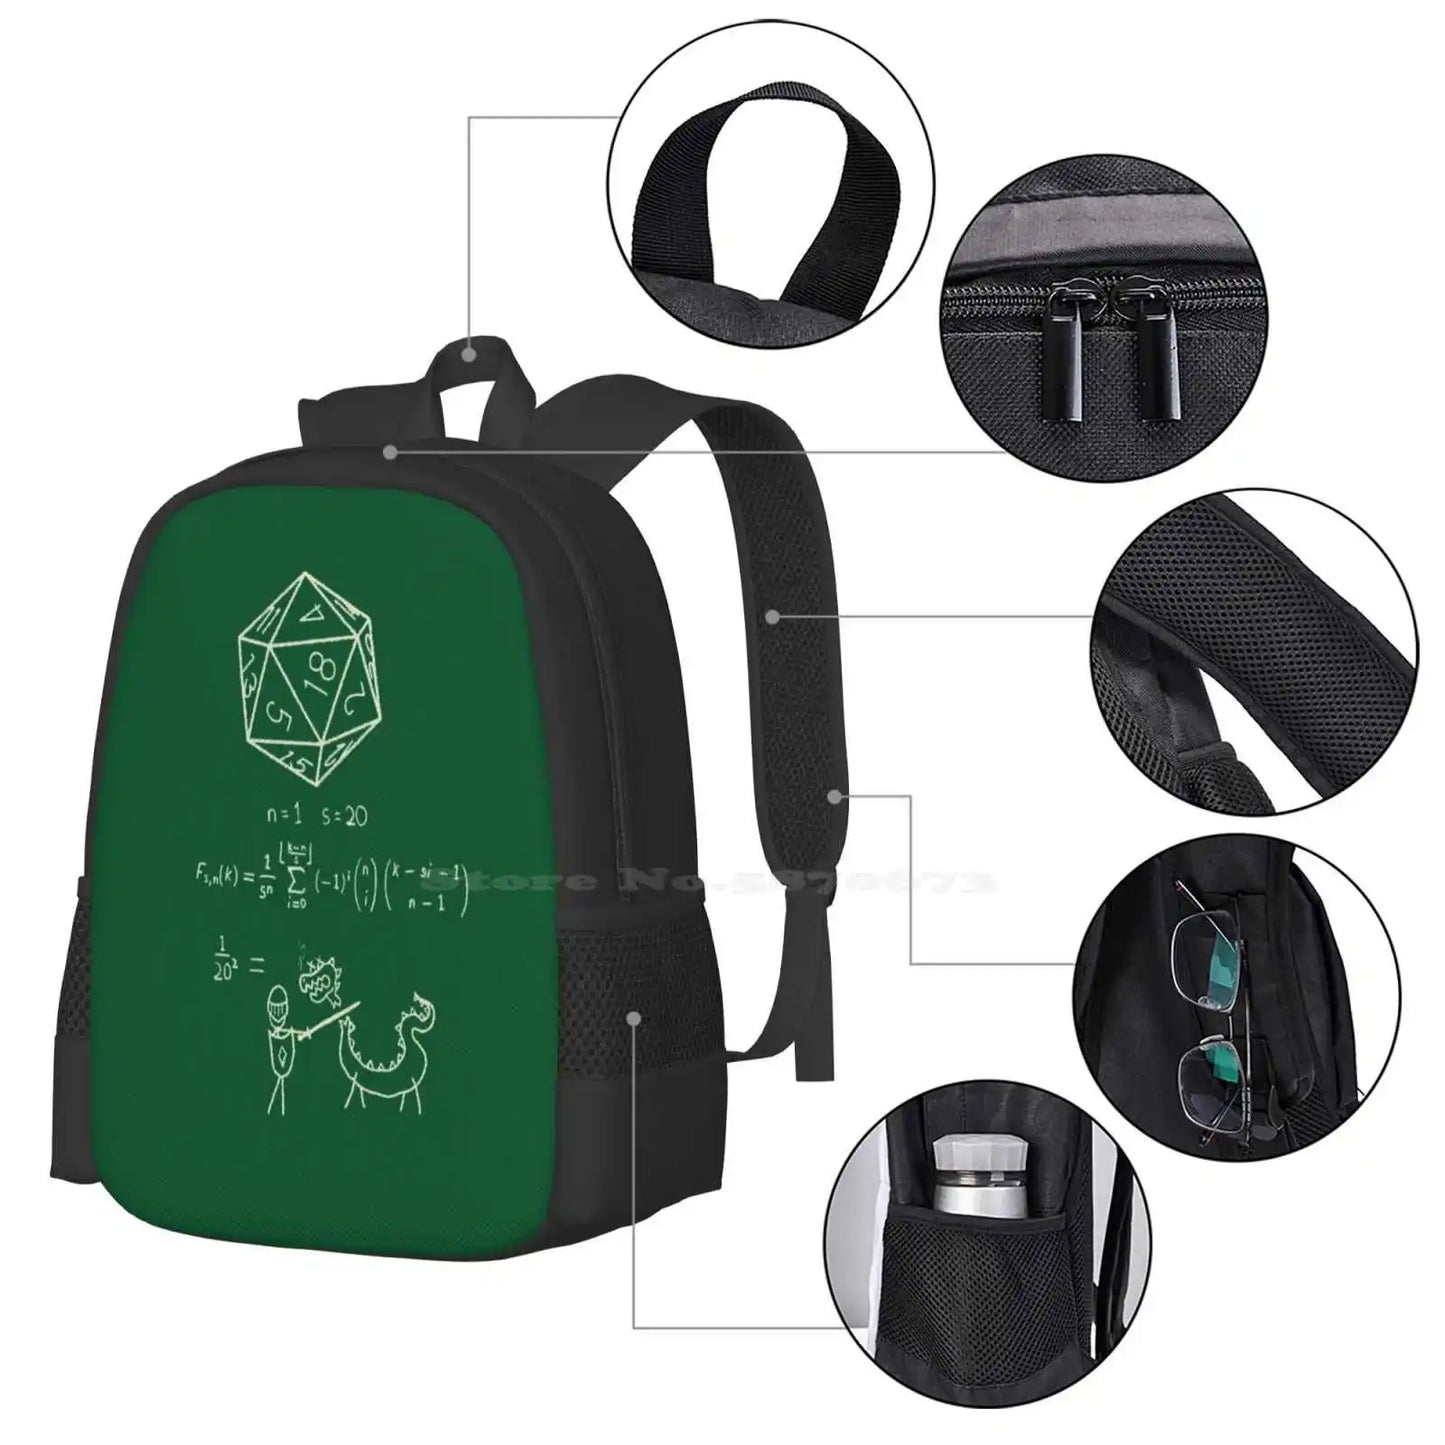 The Science Of 20 Sided Dice. School Bags Travel Laptop Backpack D20 Science Math Dice Dnd And Dragons